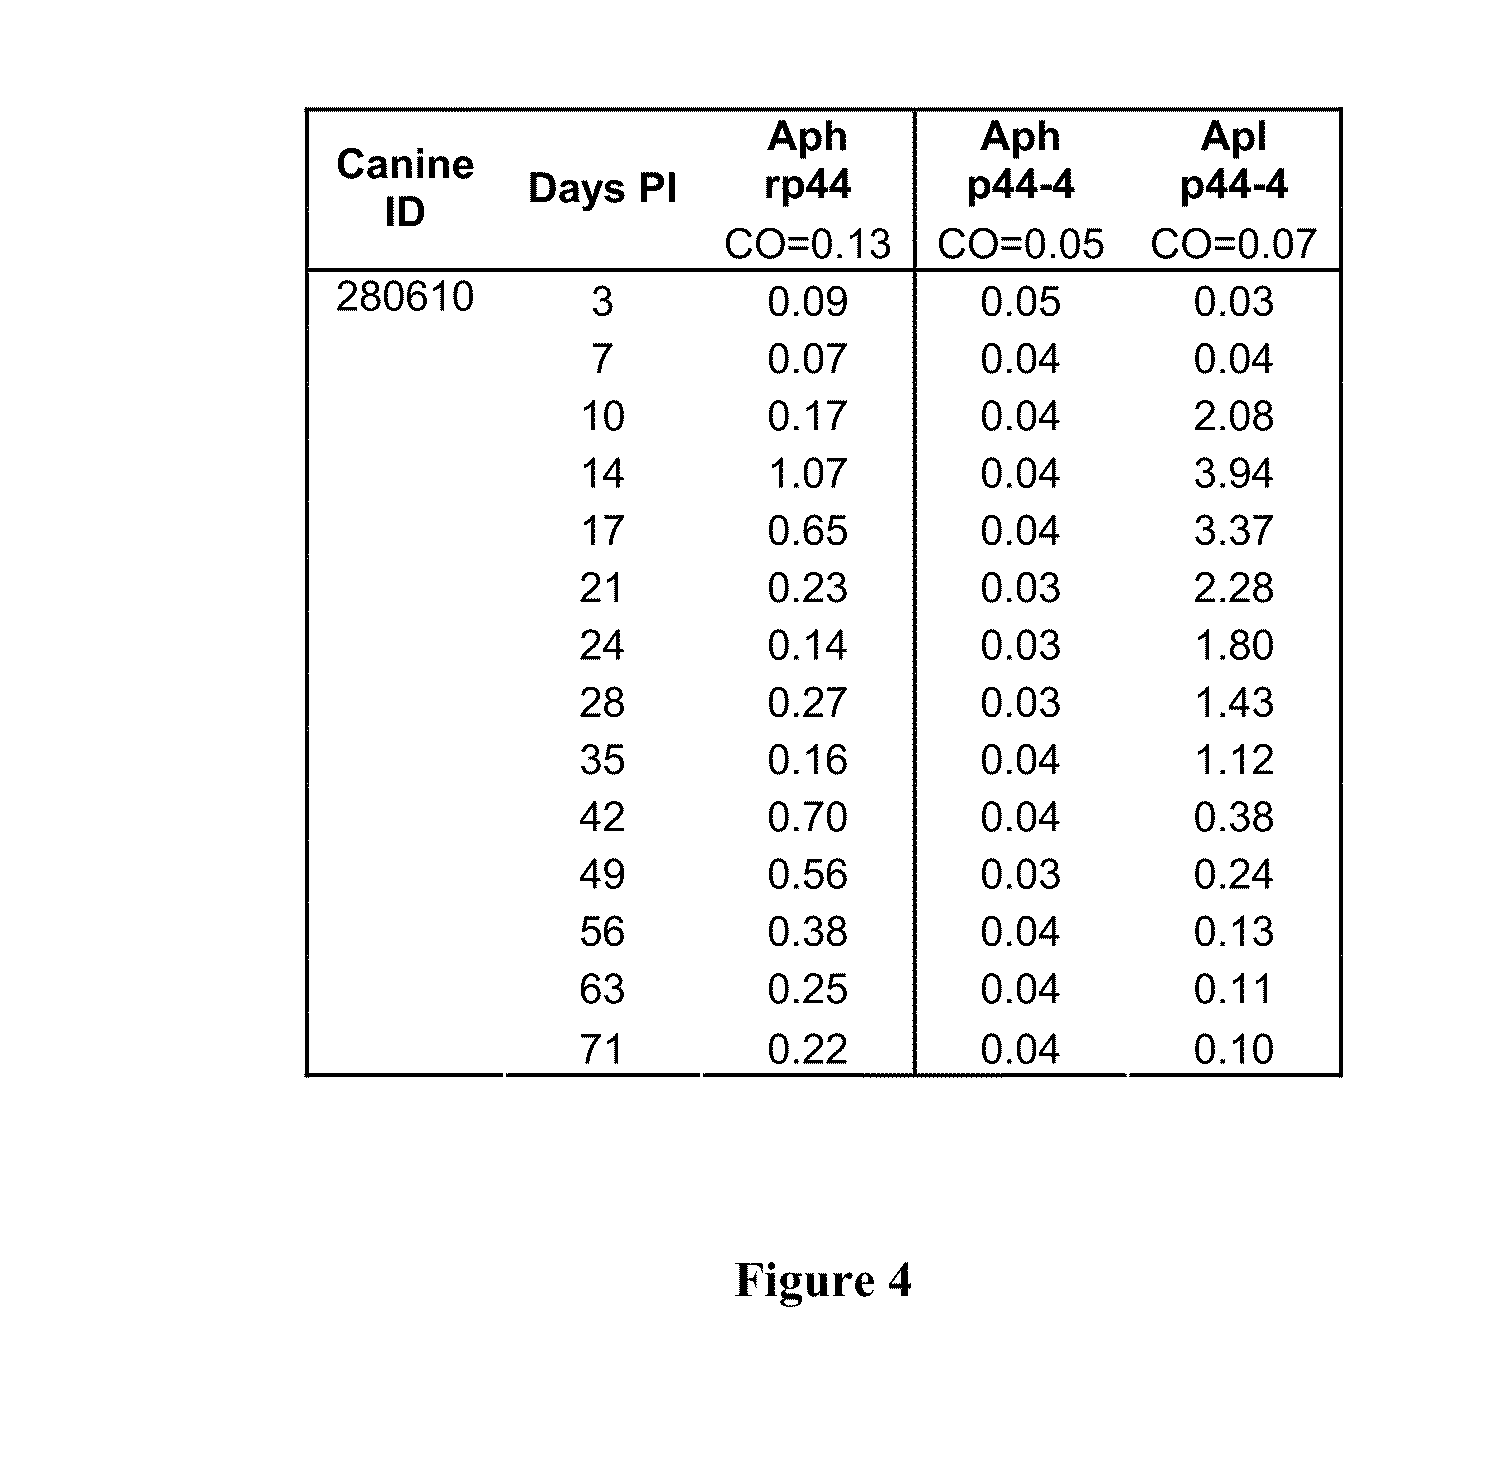 Compositions and Methods for Detection of Antibodies Specific for Anaplasma phagocytophilum (Aph) and Anaplasma platys (Apl)